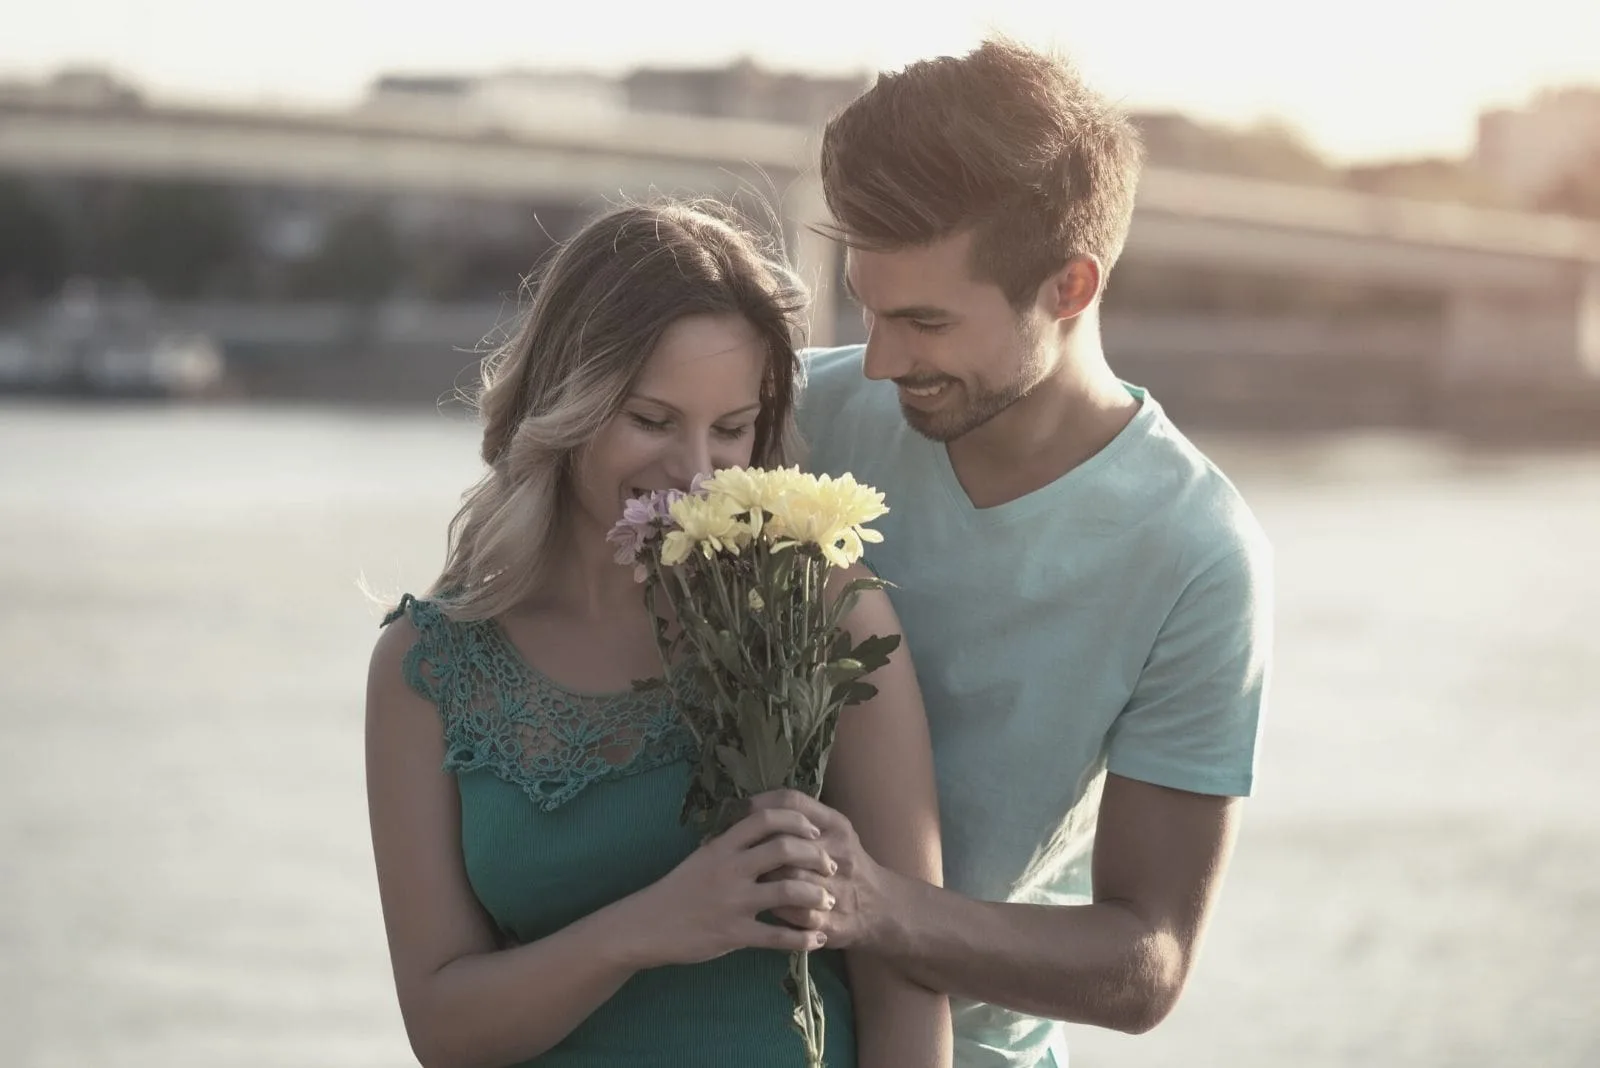 man giving flowers to his girlfriend while standing near the body of water